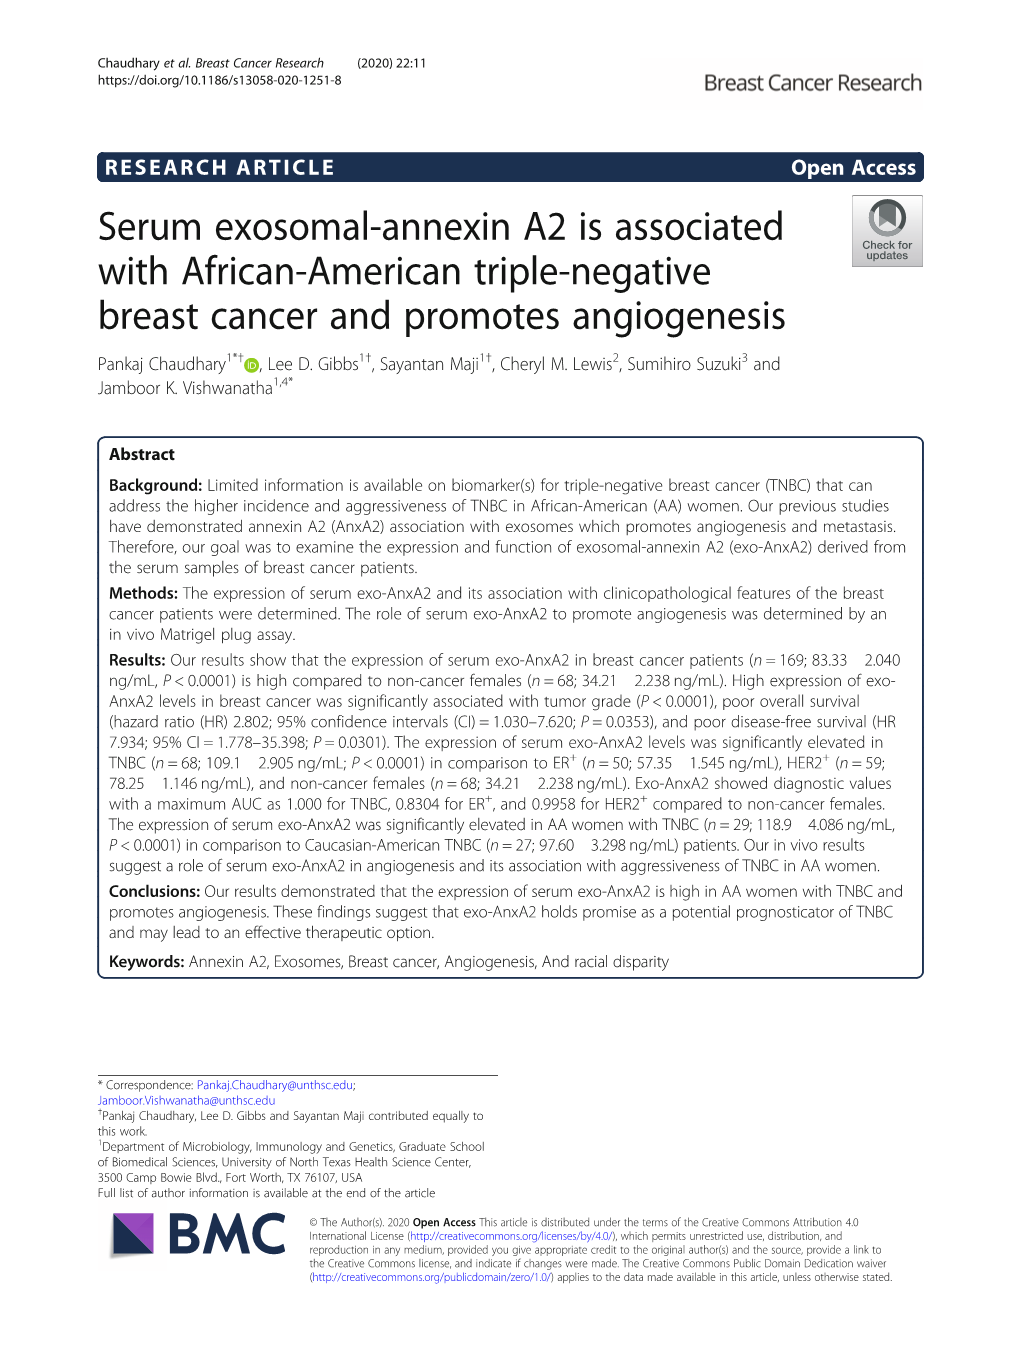 Serum Exosomal-Annexin A2 Is Associated with African-American Triple-Negative Breast Cancer and Promotes Angiogenesis Pankaj Chaudhary1*† , Lee D